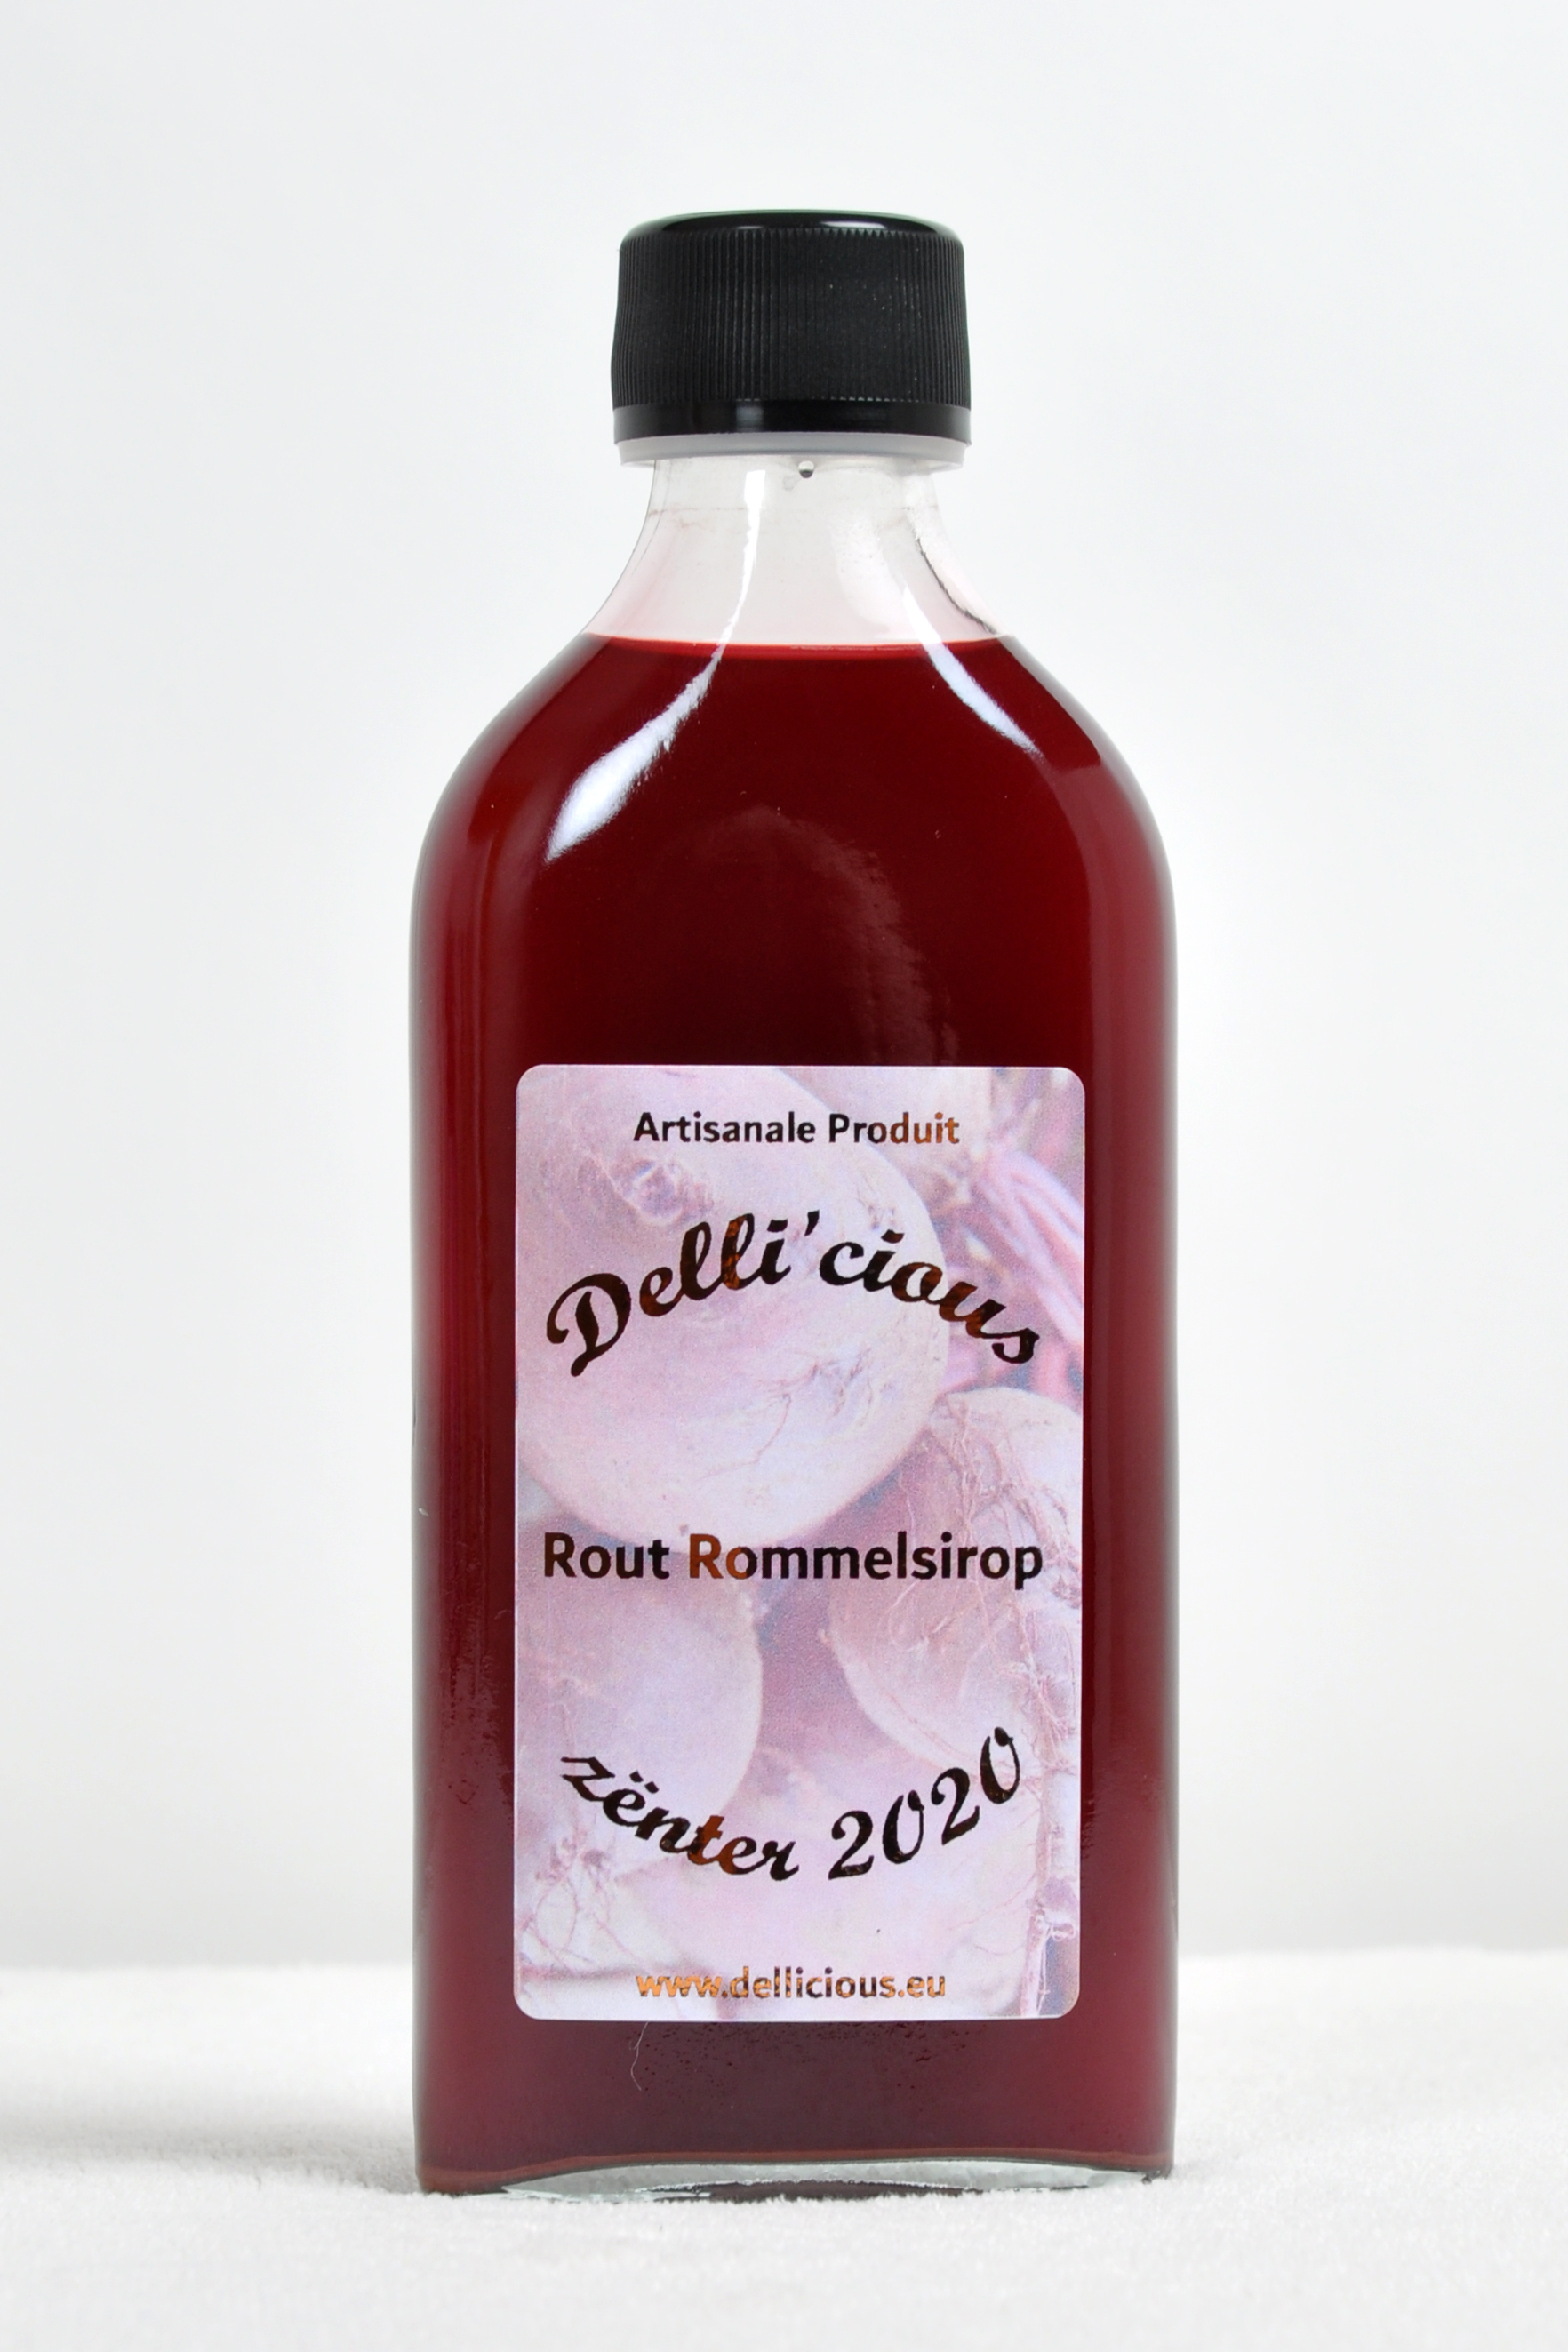 Beetroot syrup